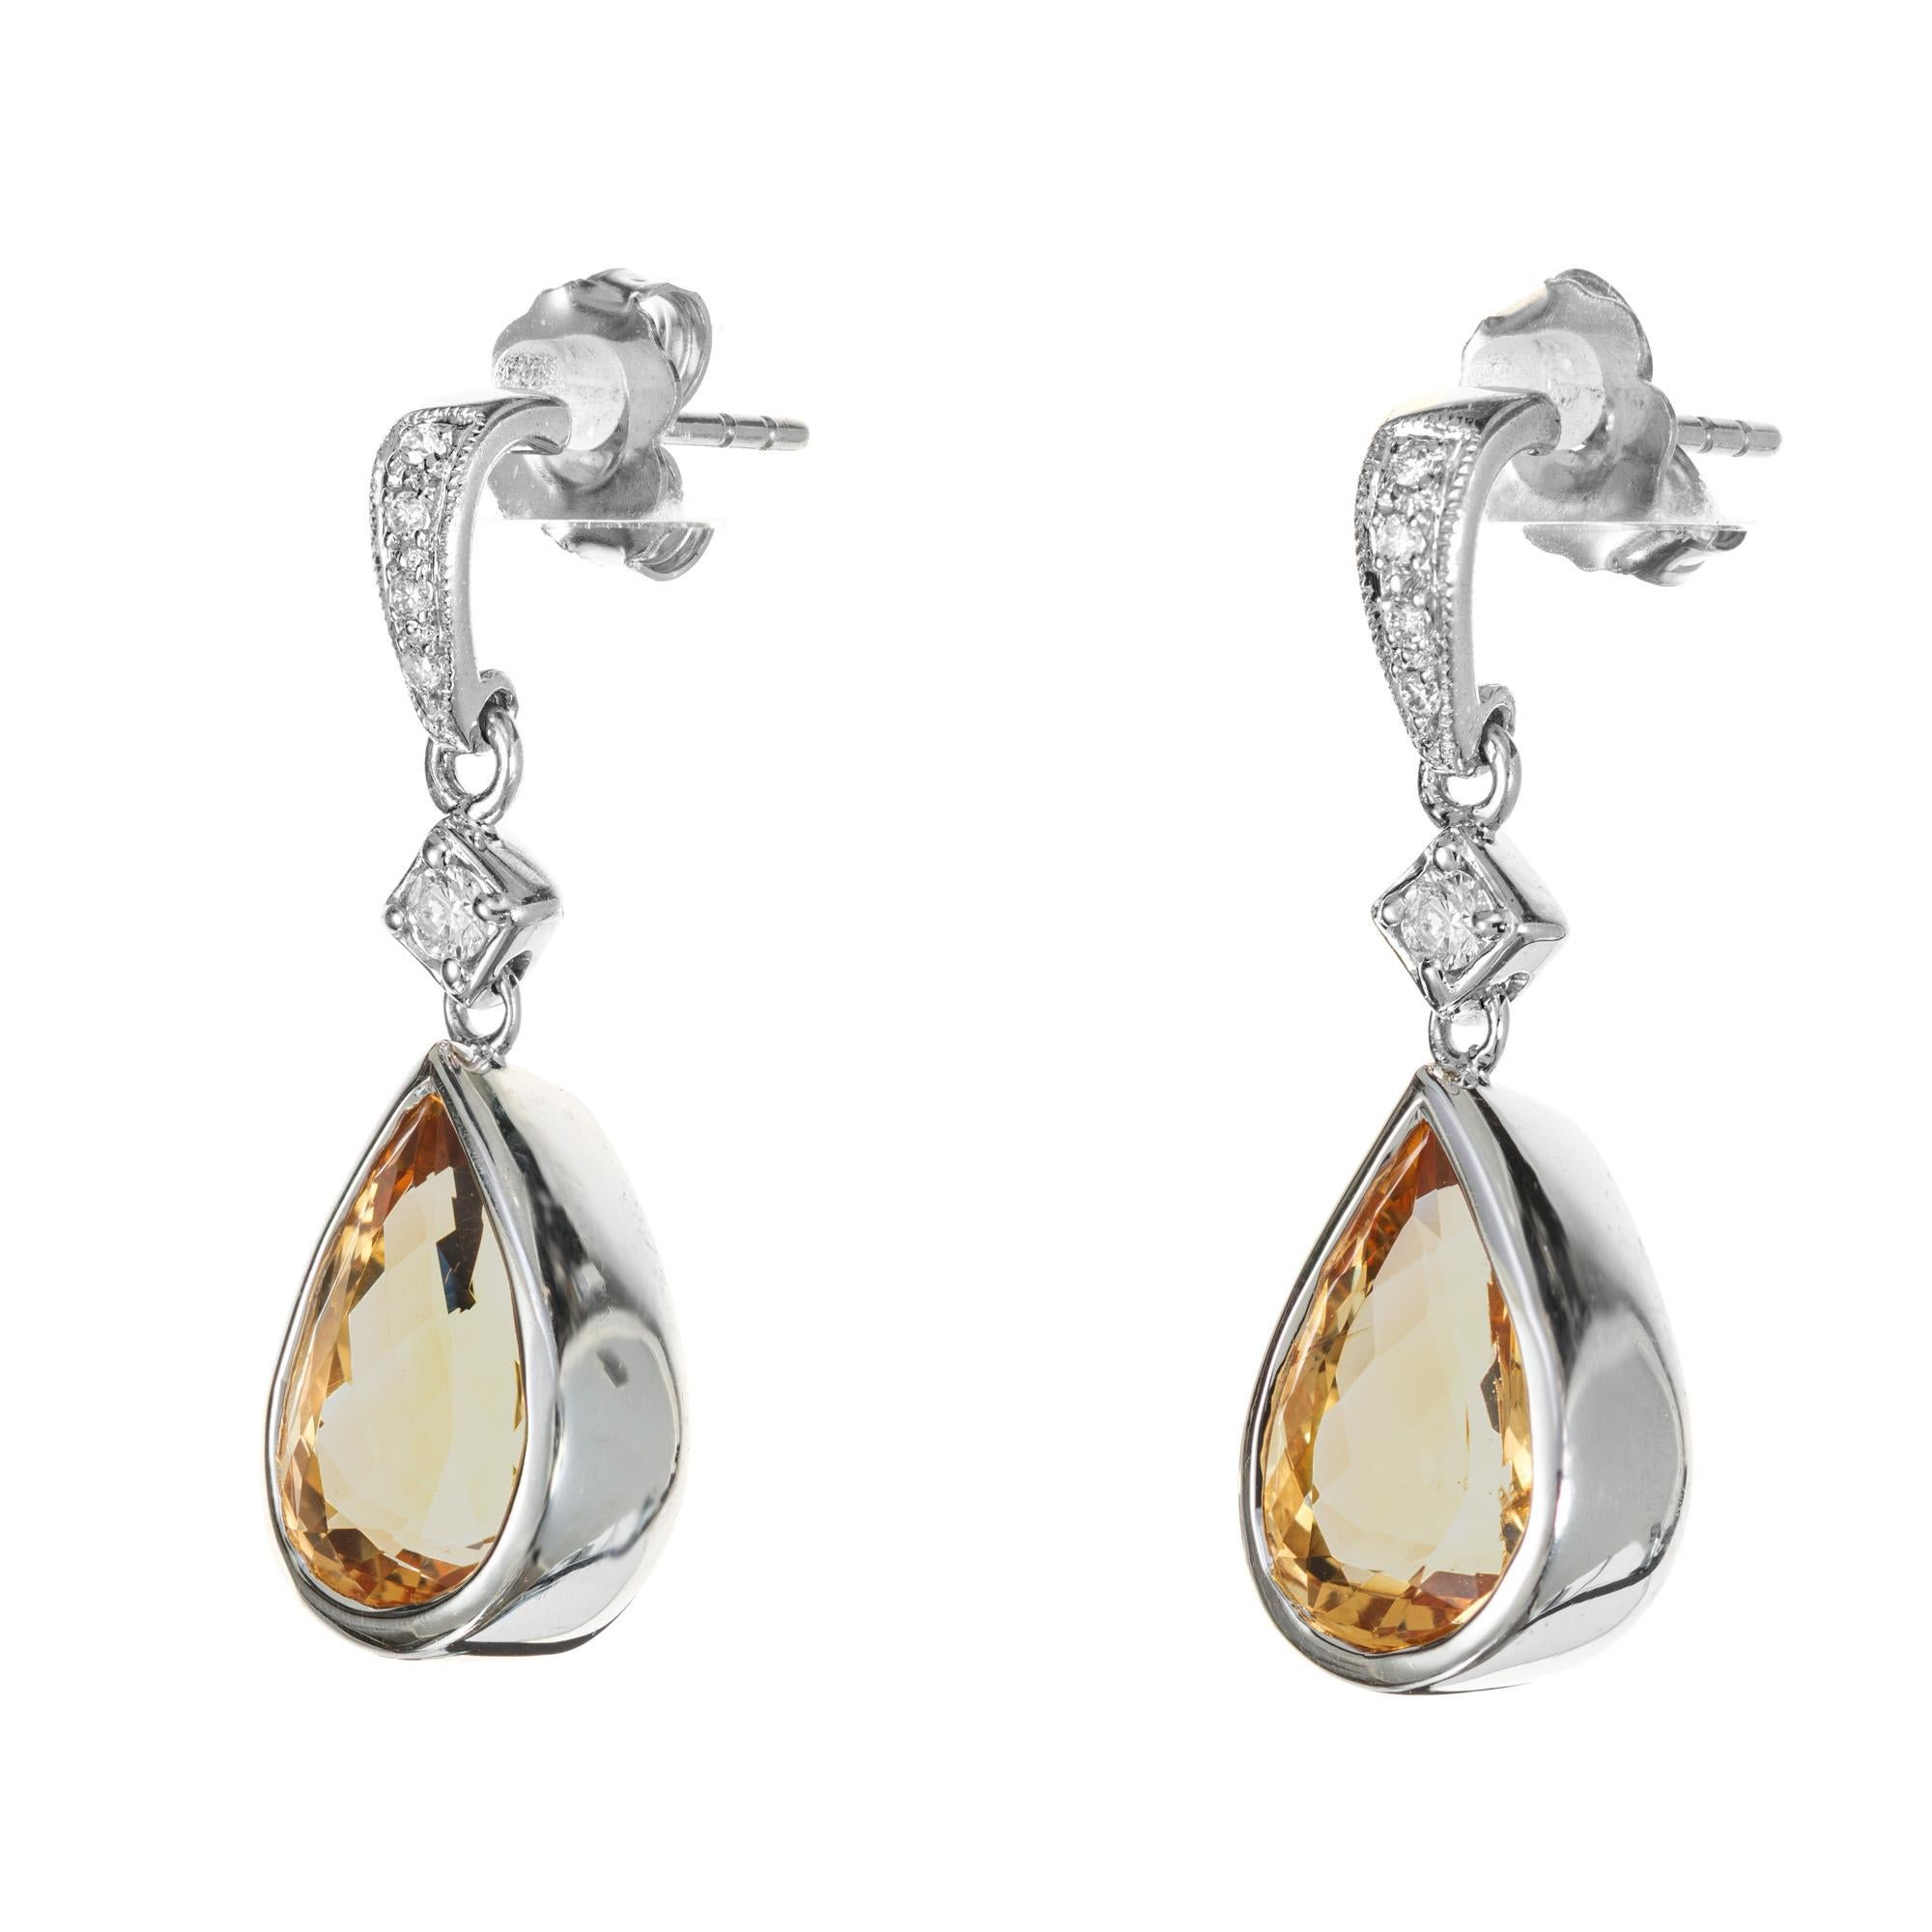 Yellow topaz and diamond dangle earrings. Two 5.78ct precious orange yellow pear shaped bezel topaz dangle earrings, each with 5 round cut brilliant cut diamonds in 14k white gold.

2 pear shape orange yellow topaz, approx.. 5.78cts GIA Certificate